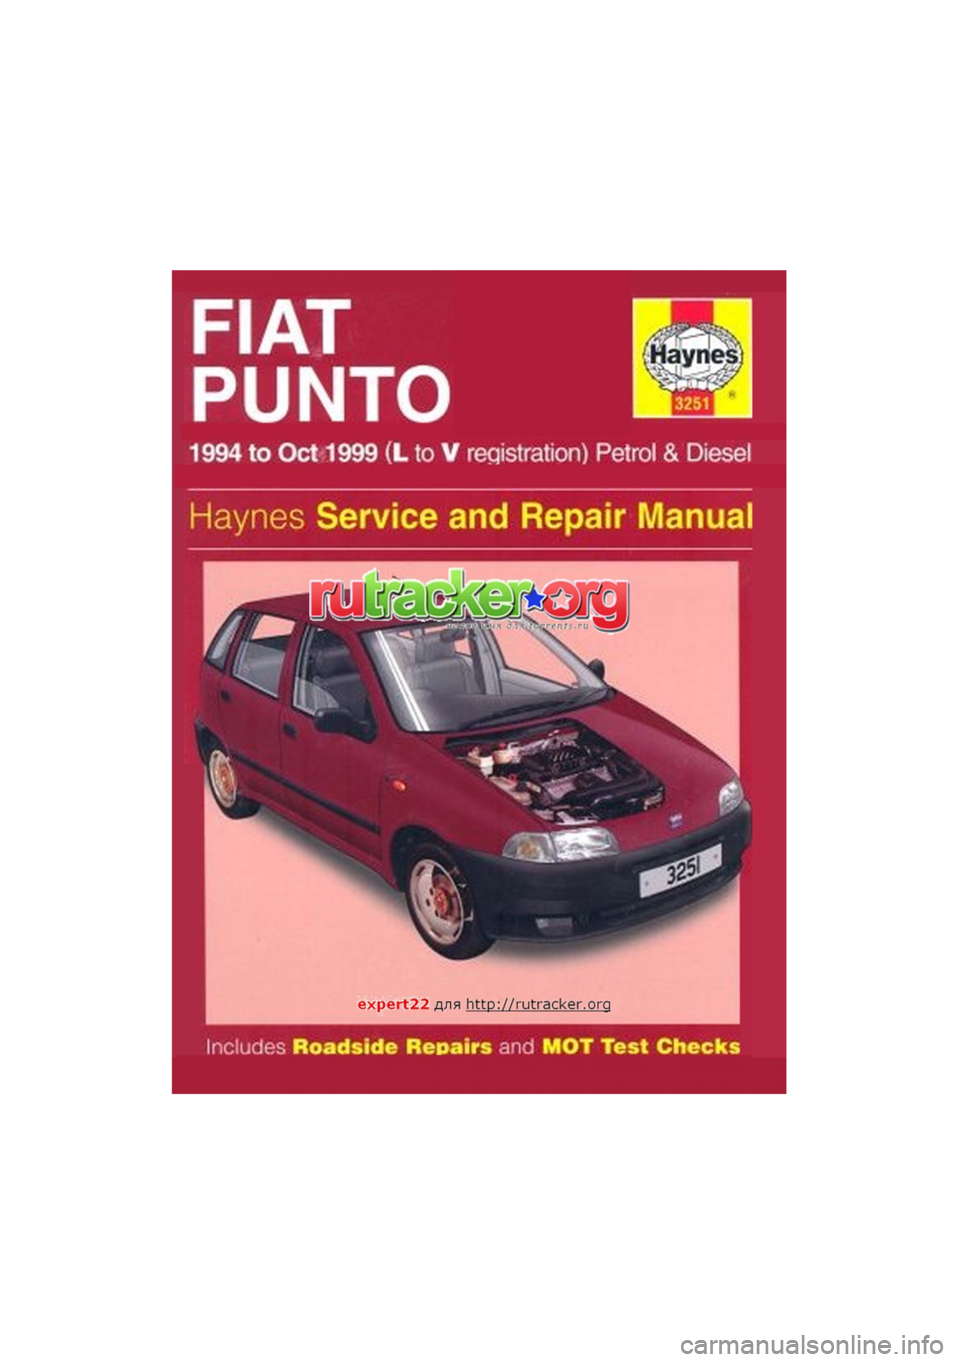 FIAT PUNTO 1999 176 / 1.G Workshop Manual 
FIAT 
PUNTO 
1994 to Oct 1999 (L to V registration) Petrol & Diesel 
Haynes Service and Repair Manual 
expert22 fl/ia http://rutracker.org 
Includes Roadside Repairs and MOT Test Checks  